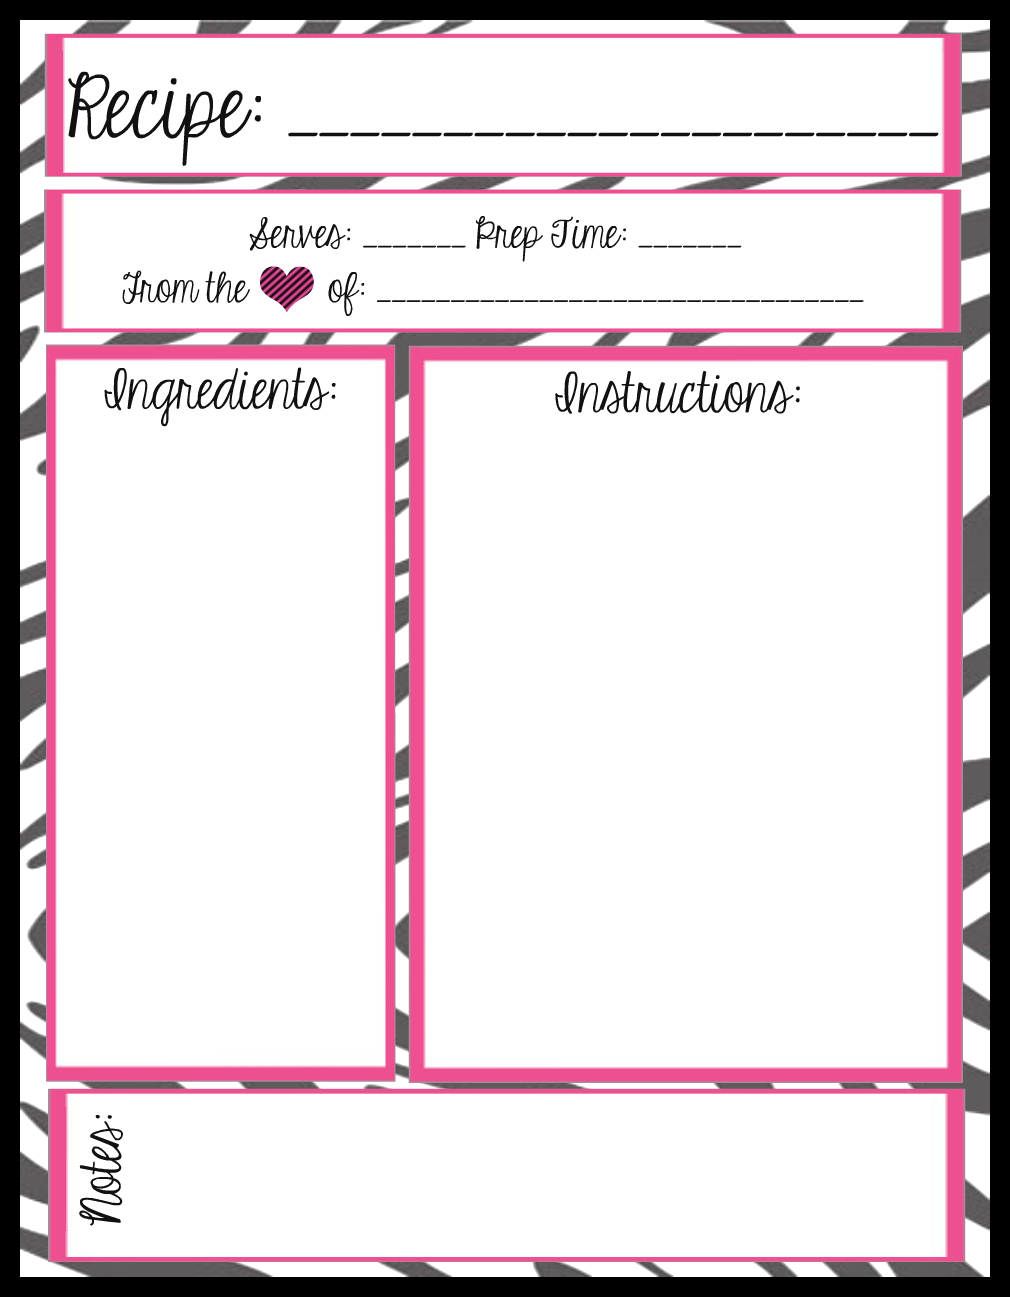 Mesa s Place Full Page Recipe Templates Free Printables 